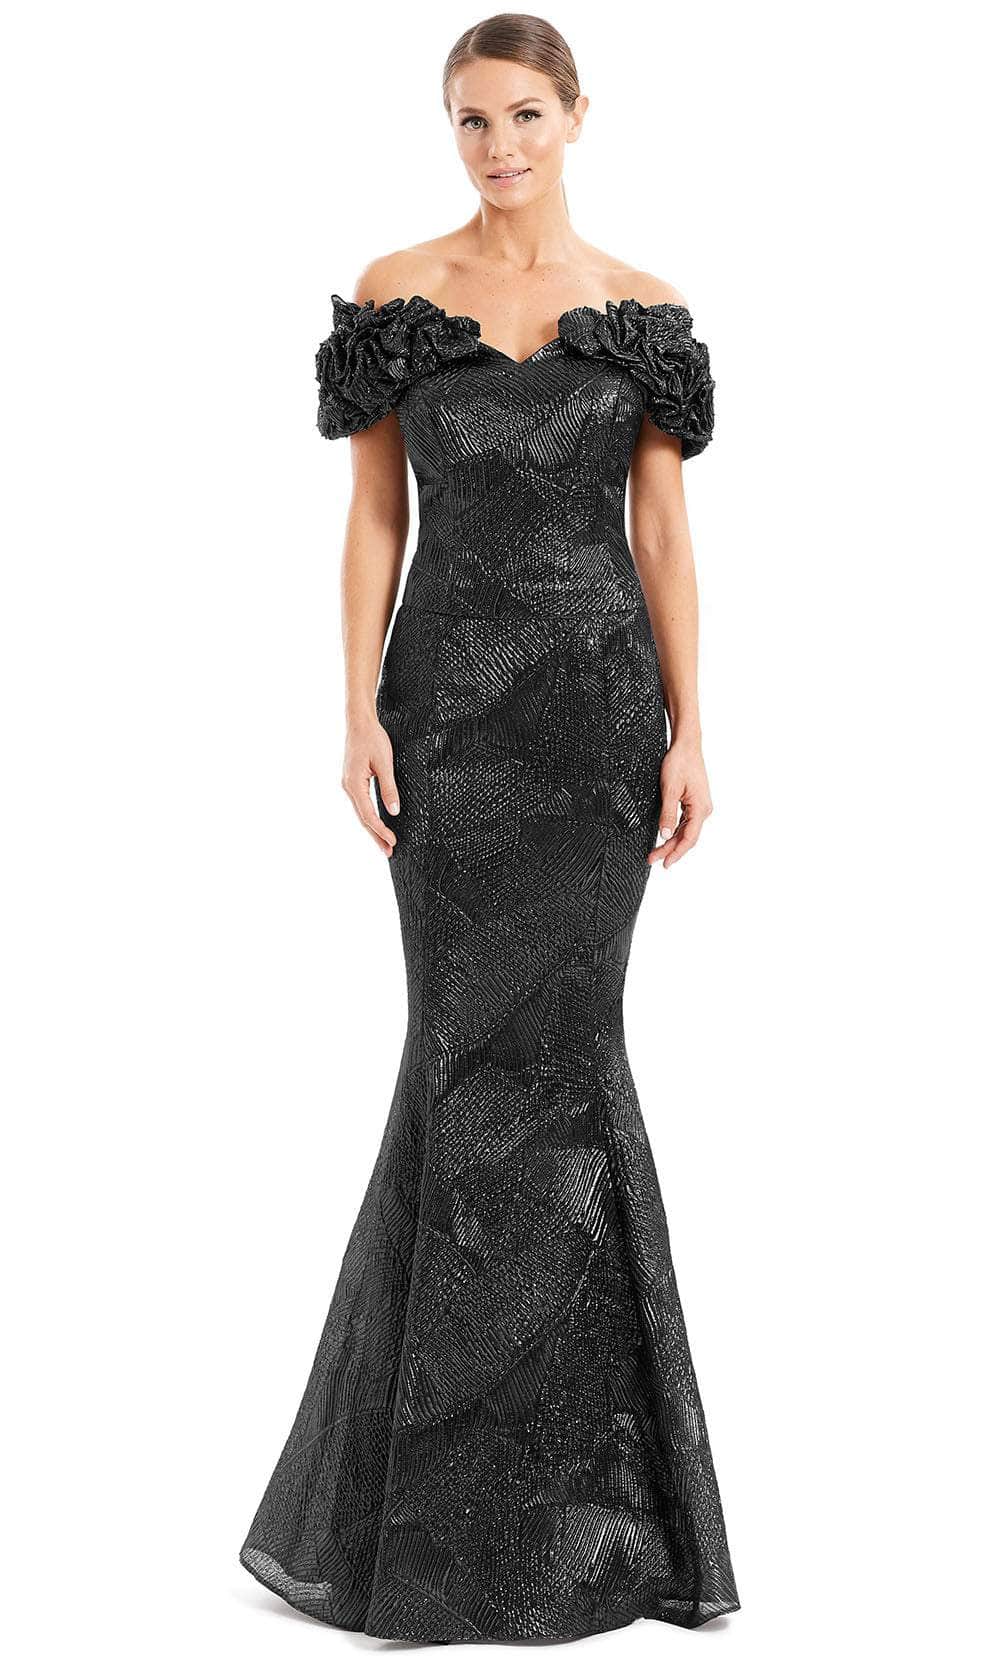 Image of Alexander by Daymor 1650 - Ruffled Sleeve Metallic Evening Gown